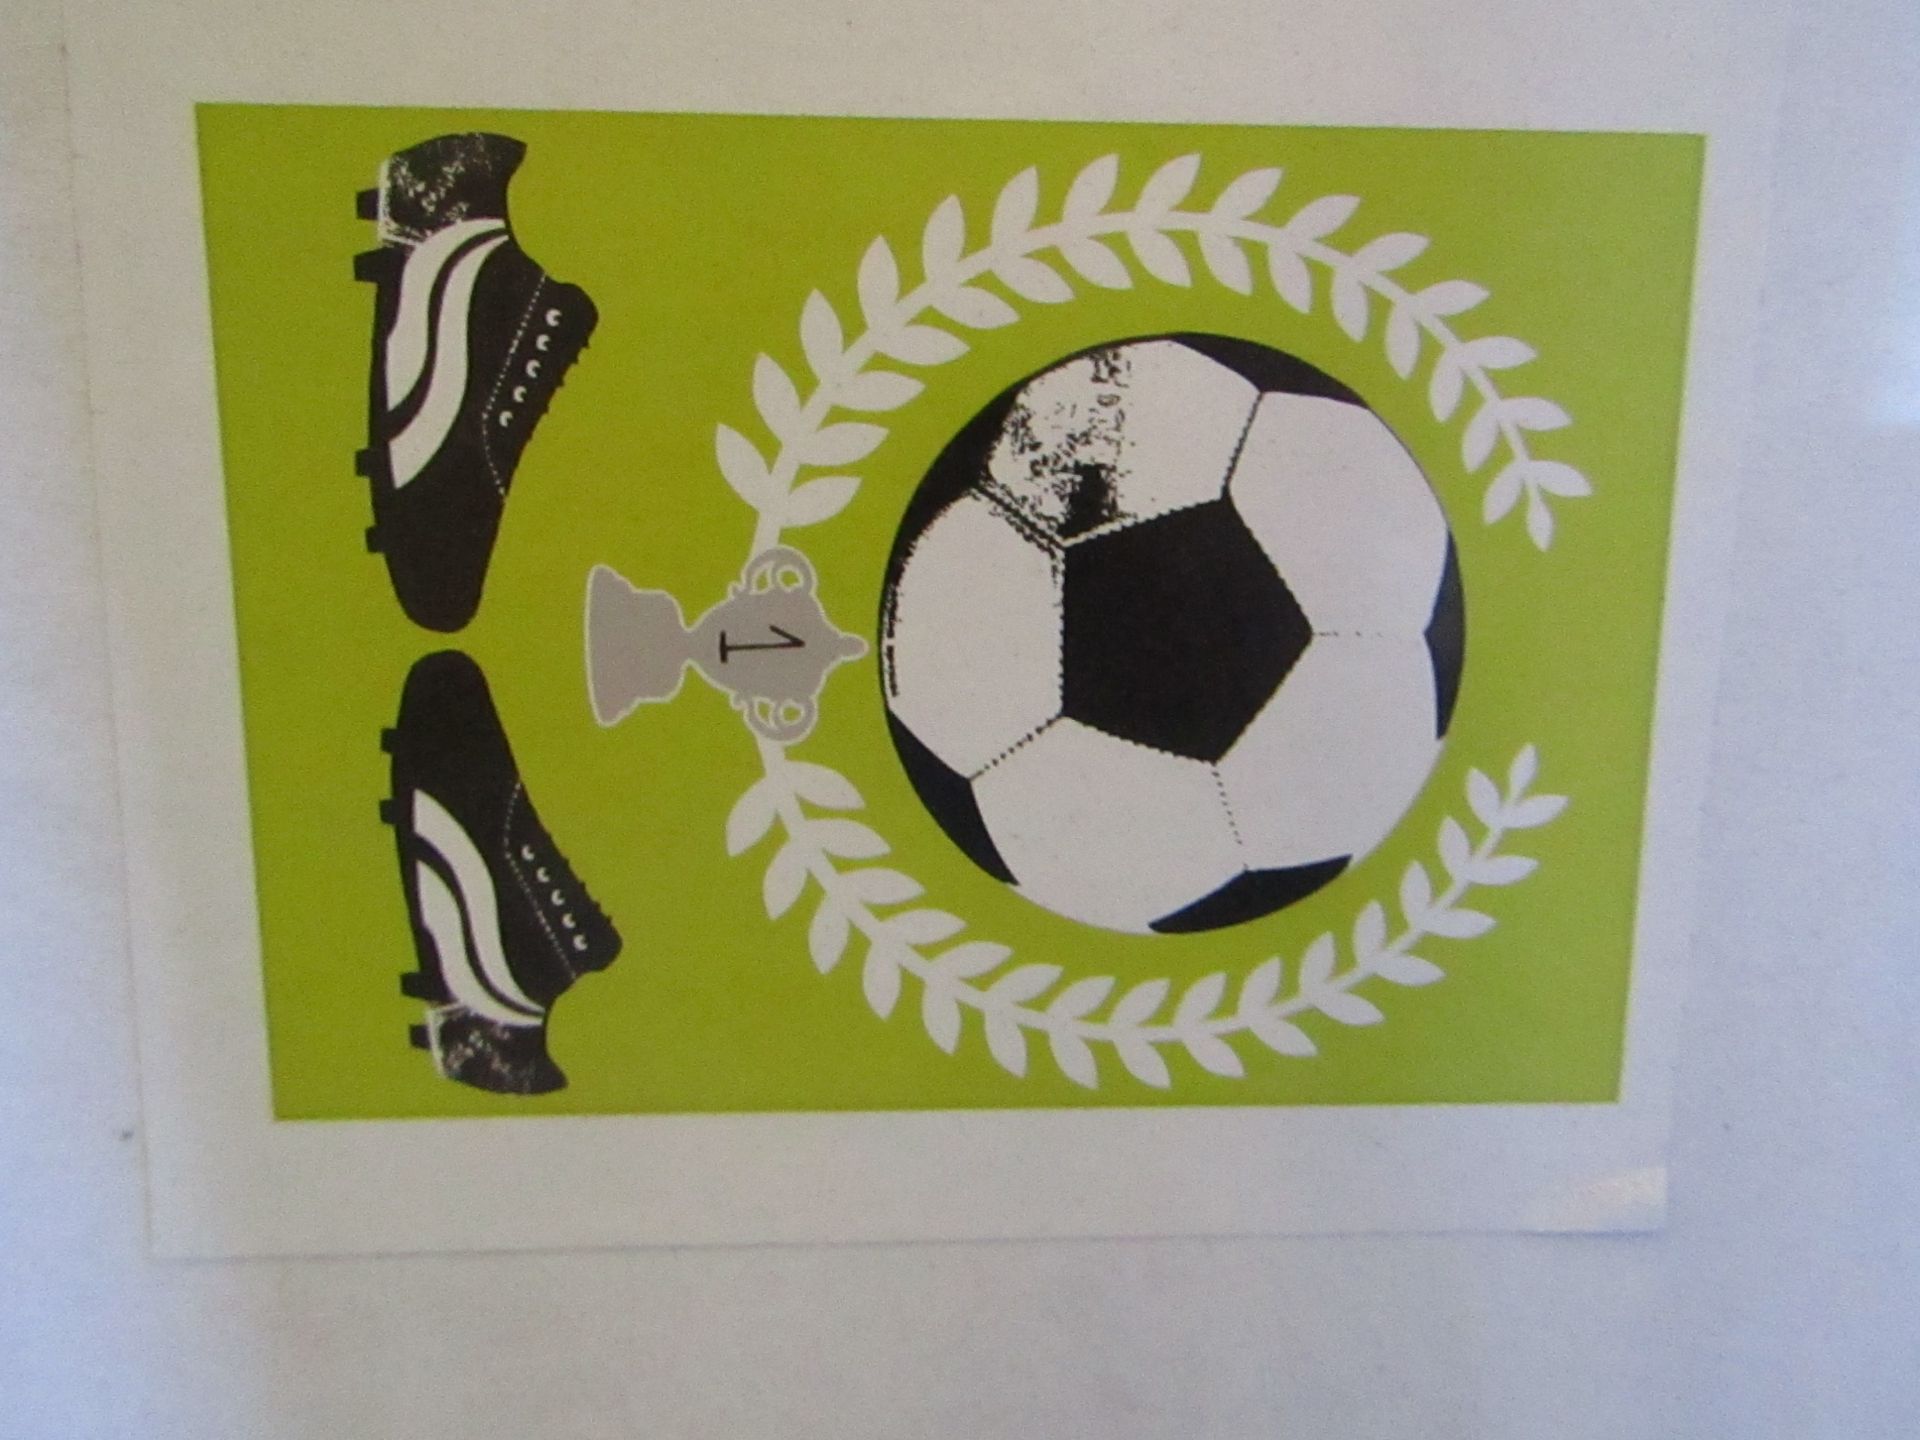 10 x "Football" Framed Print by Arthouse size 40cm x 30cm new & packaged